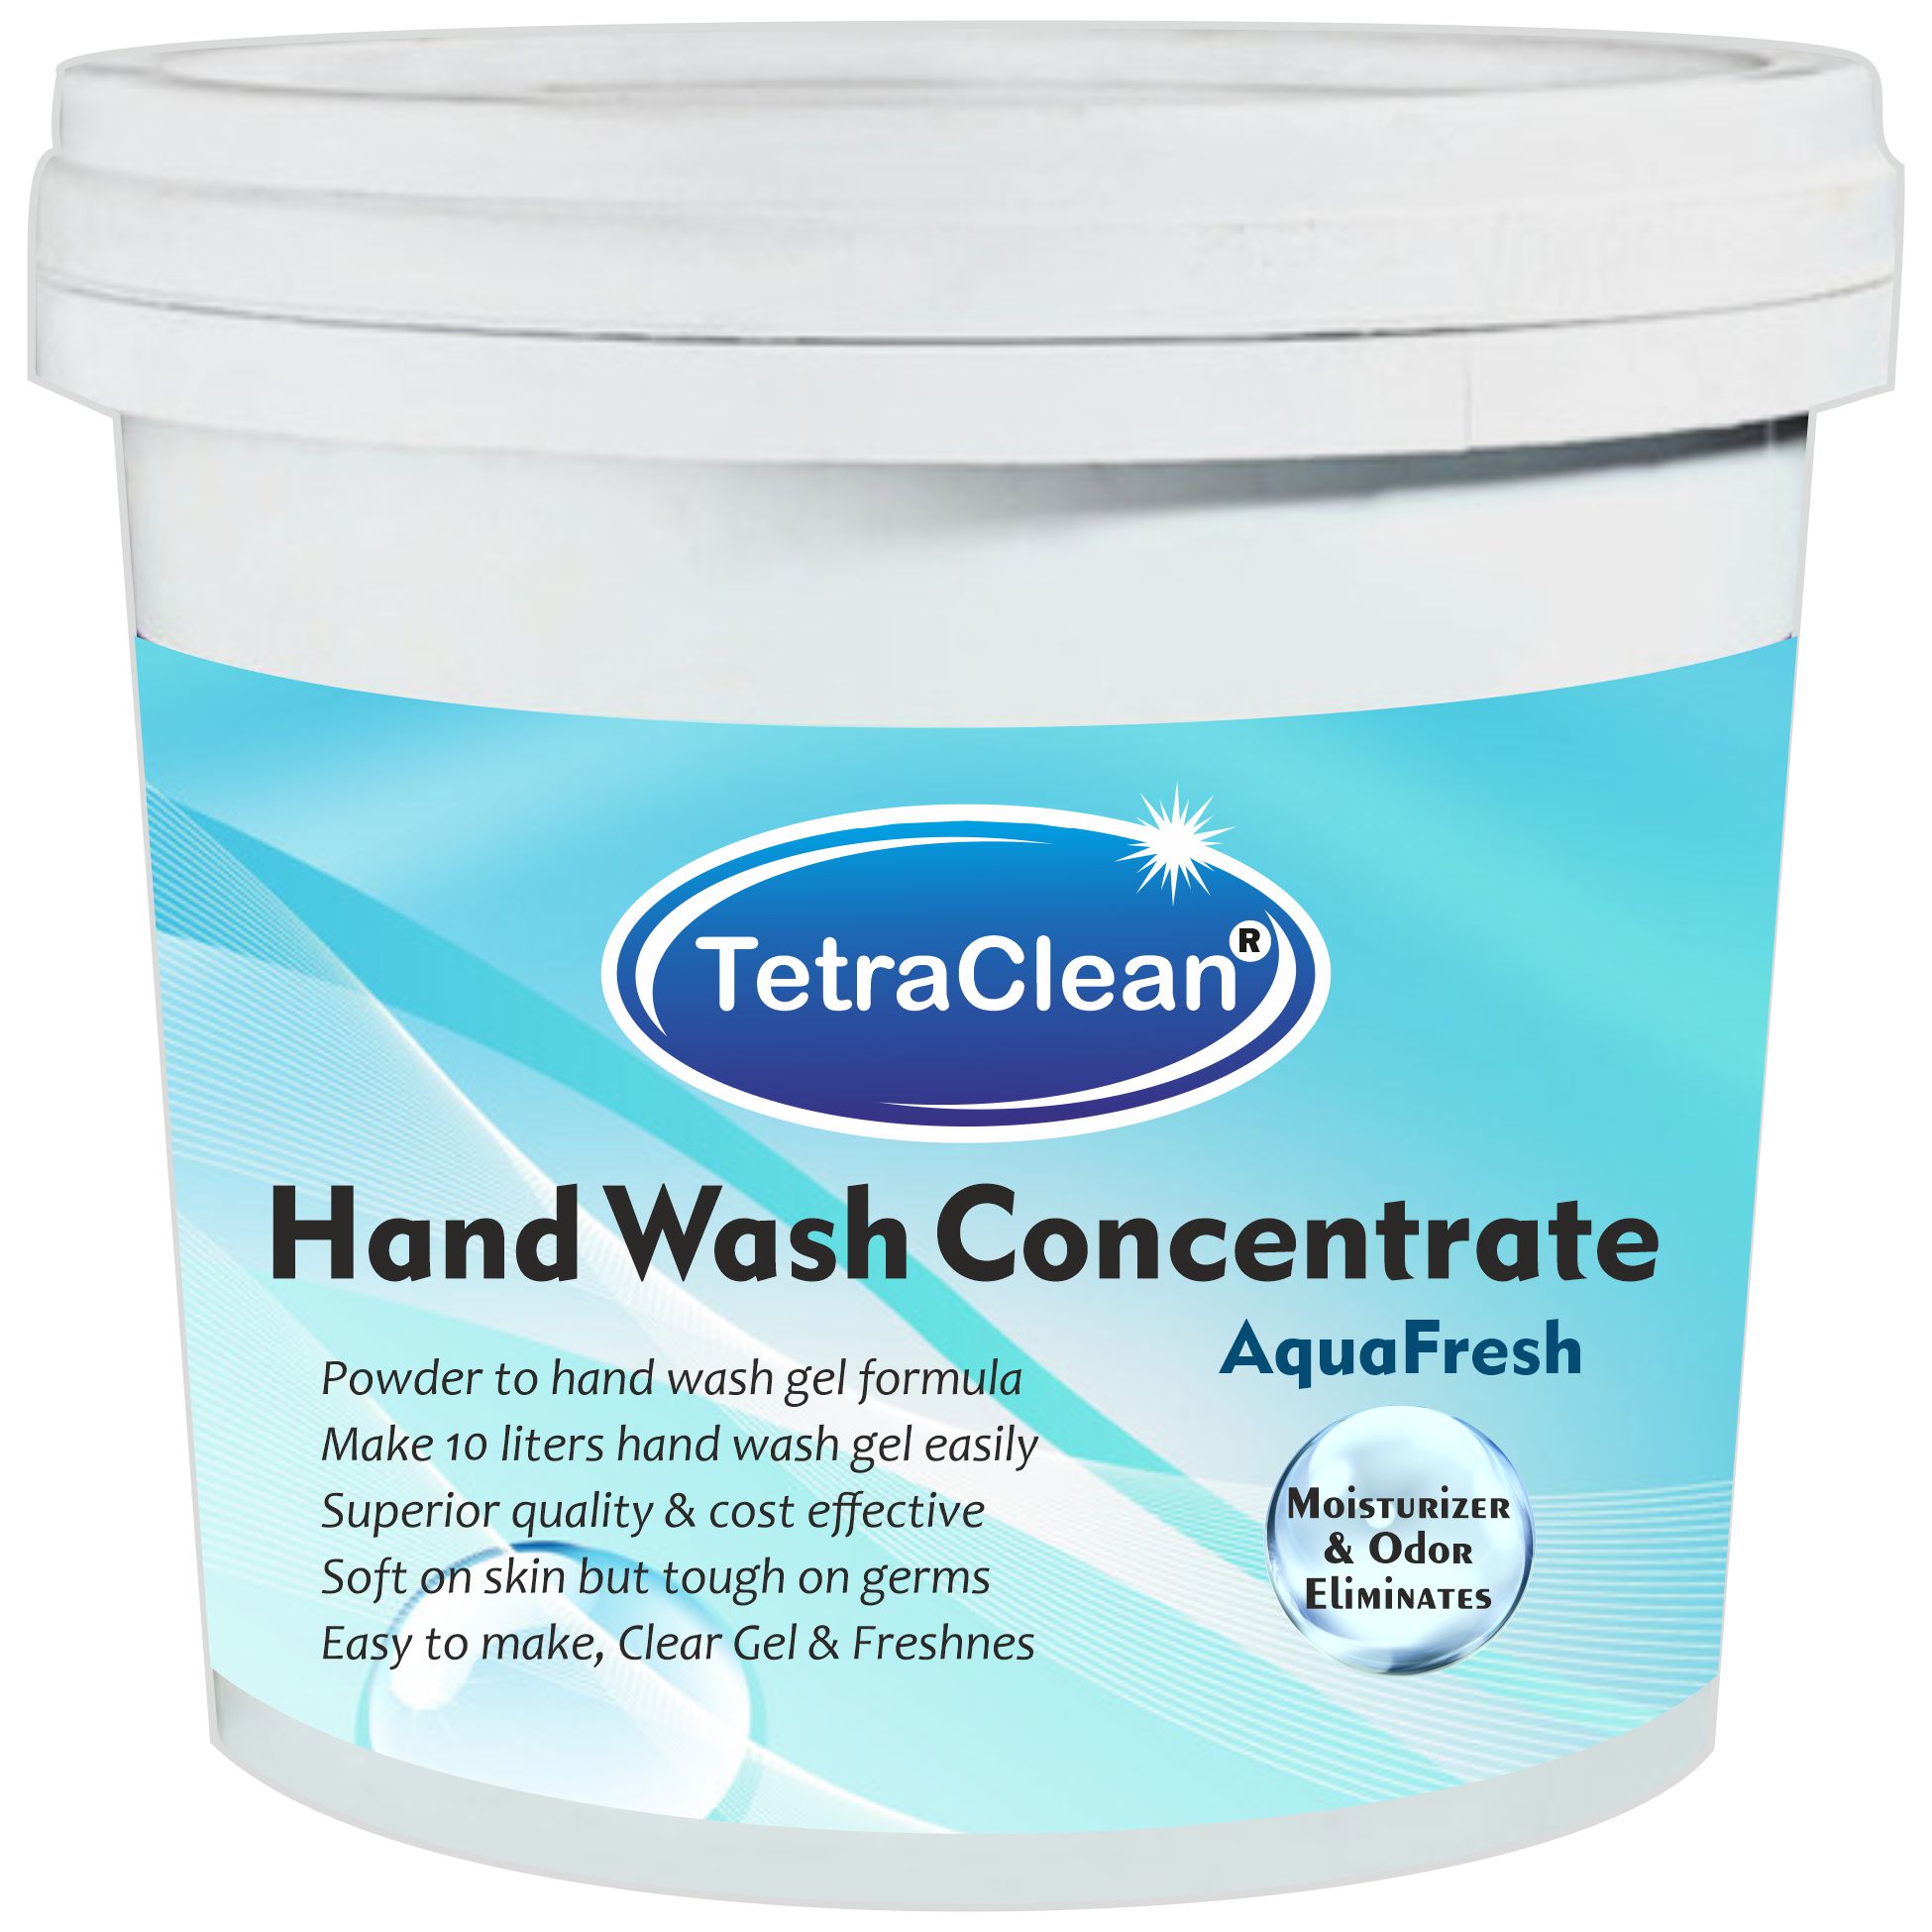 TetraClean Hand Wash Concentrate Powder - 500gm packing - with aqua fragrance